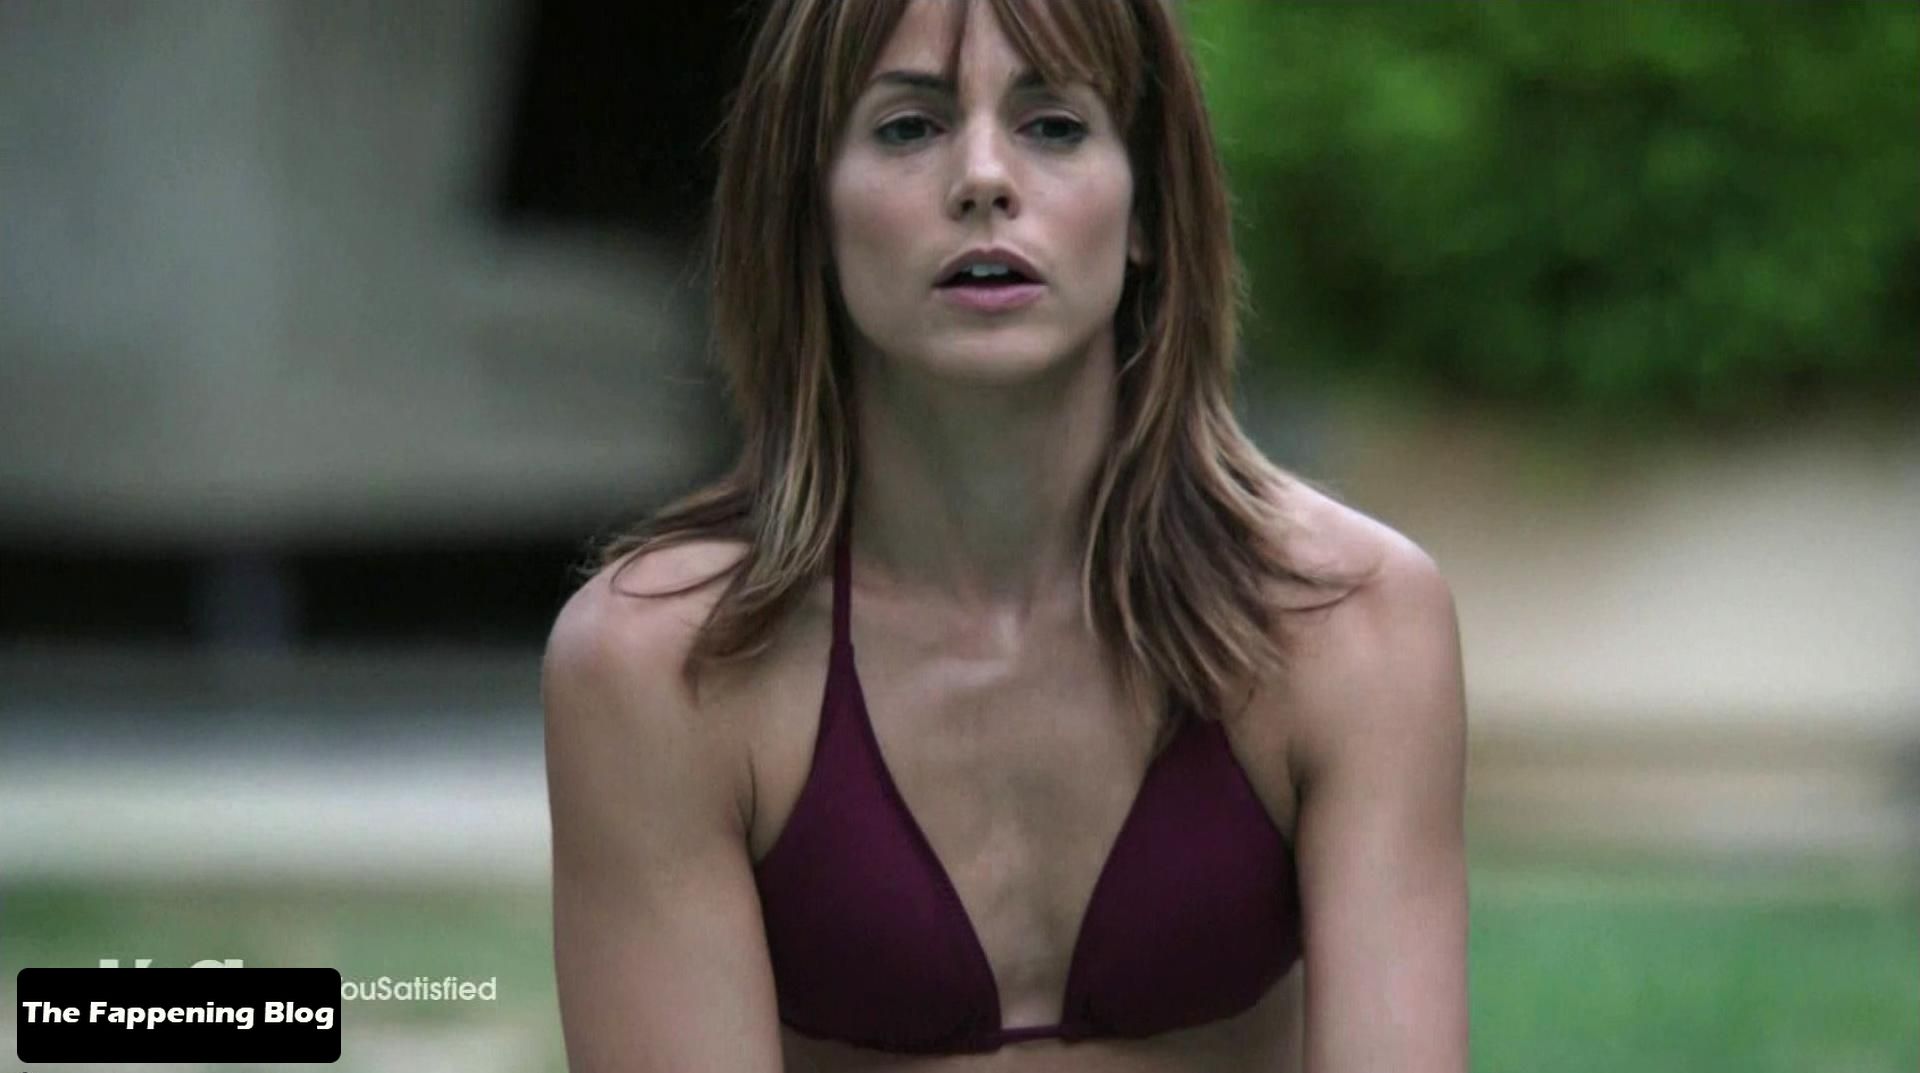 Stephanie-Szostak-Sexy-Collection-The-Fappening-Blog-25.jpg